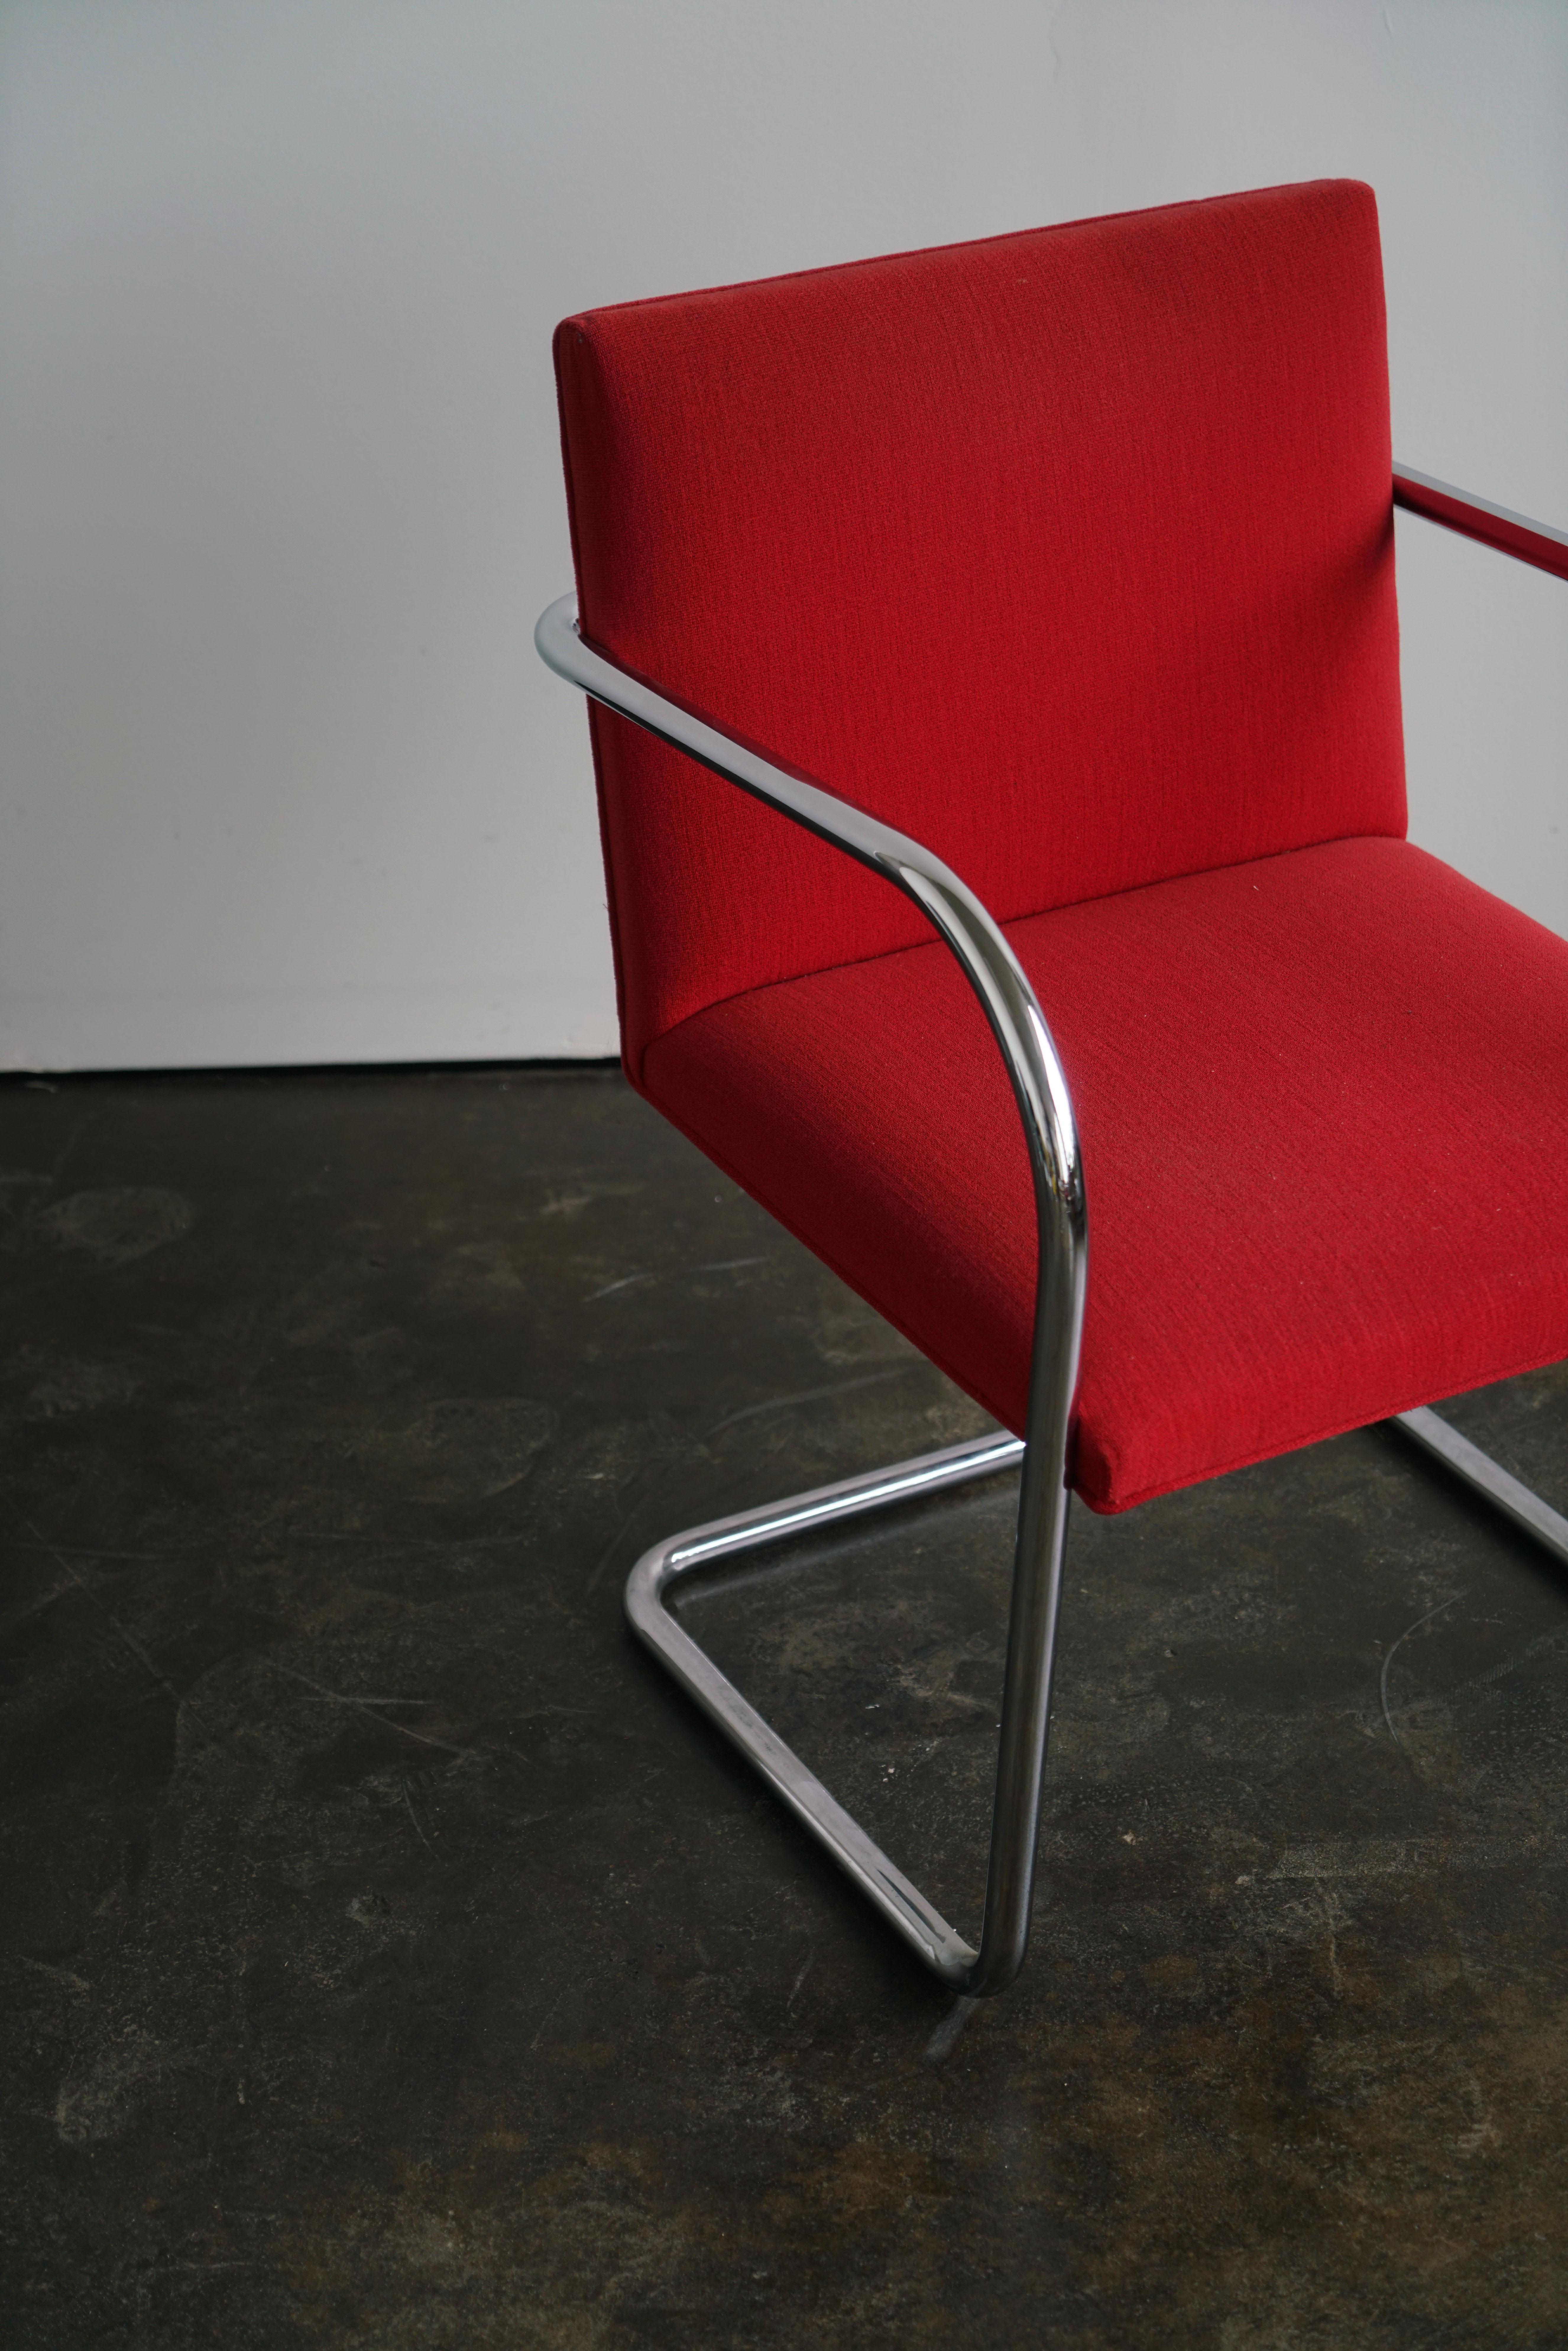 Mies Van der Rohe BRNO chairs for Knoll, 2000’s

6 available

Chrome-plated steel, original red upholstery

Knoll impressed marks to arms and Knoll labels underneath

Condition: Very good to excellent. No major rips or tears. Professional